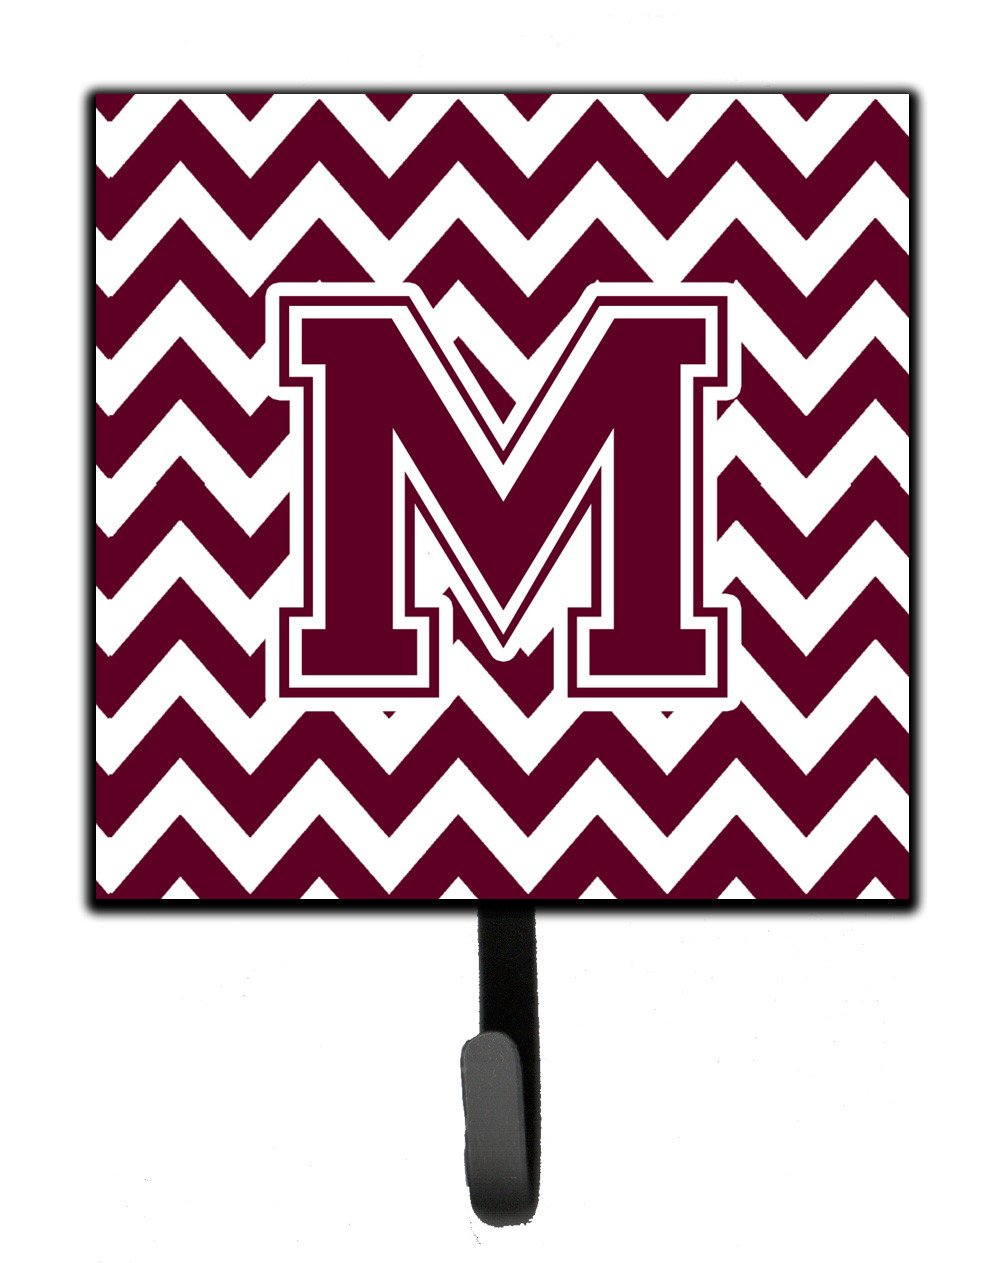 Letter M Chevron Maroon and White  Leash or Key Holder CJ1051-MSH4 by Caroline's Treasures